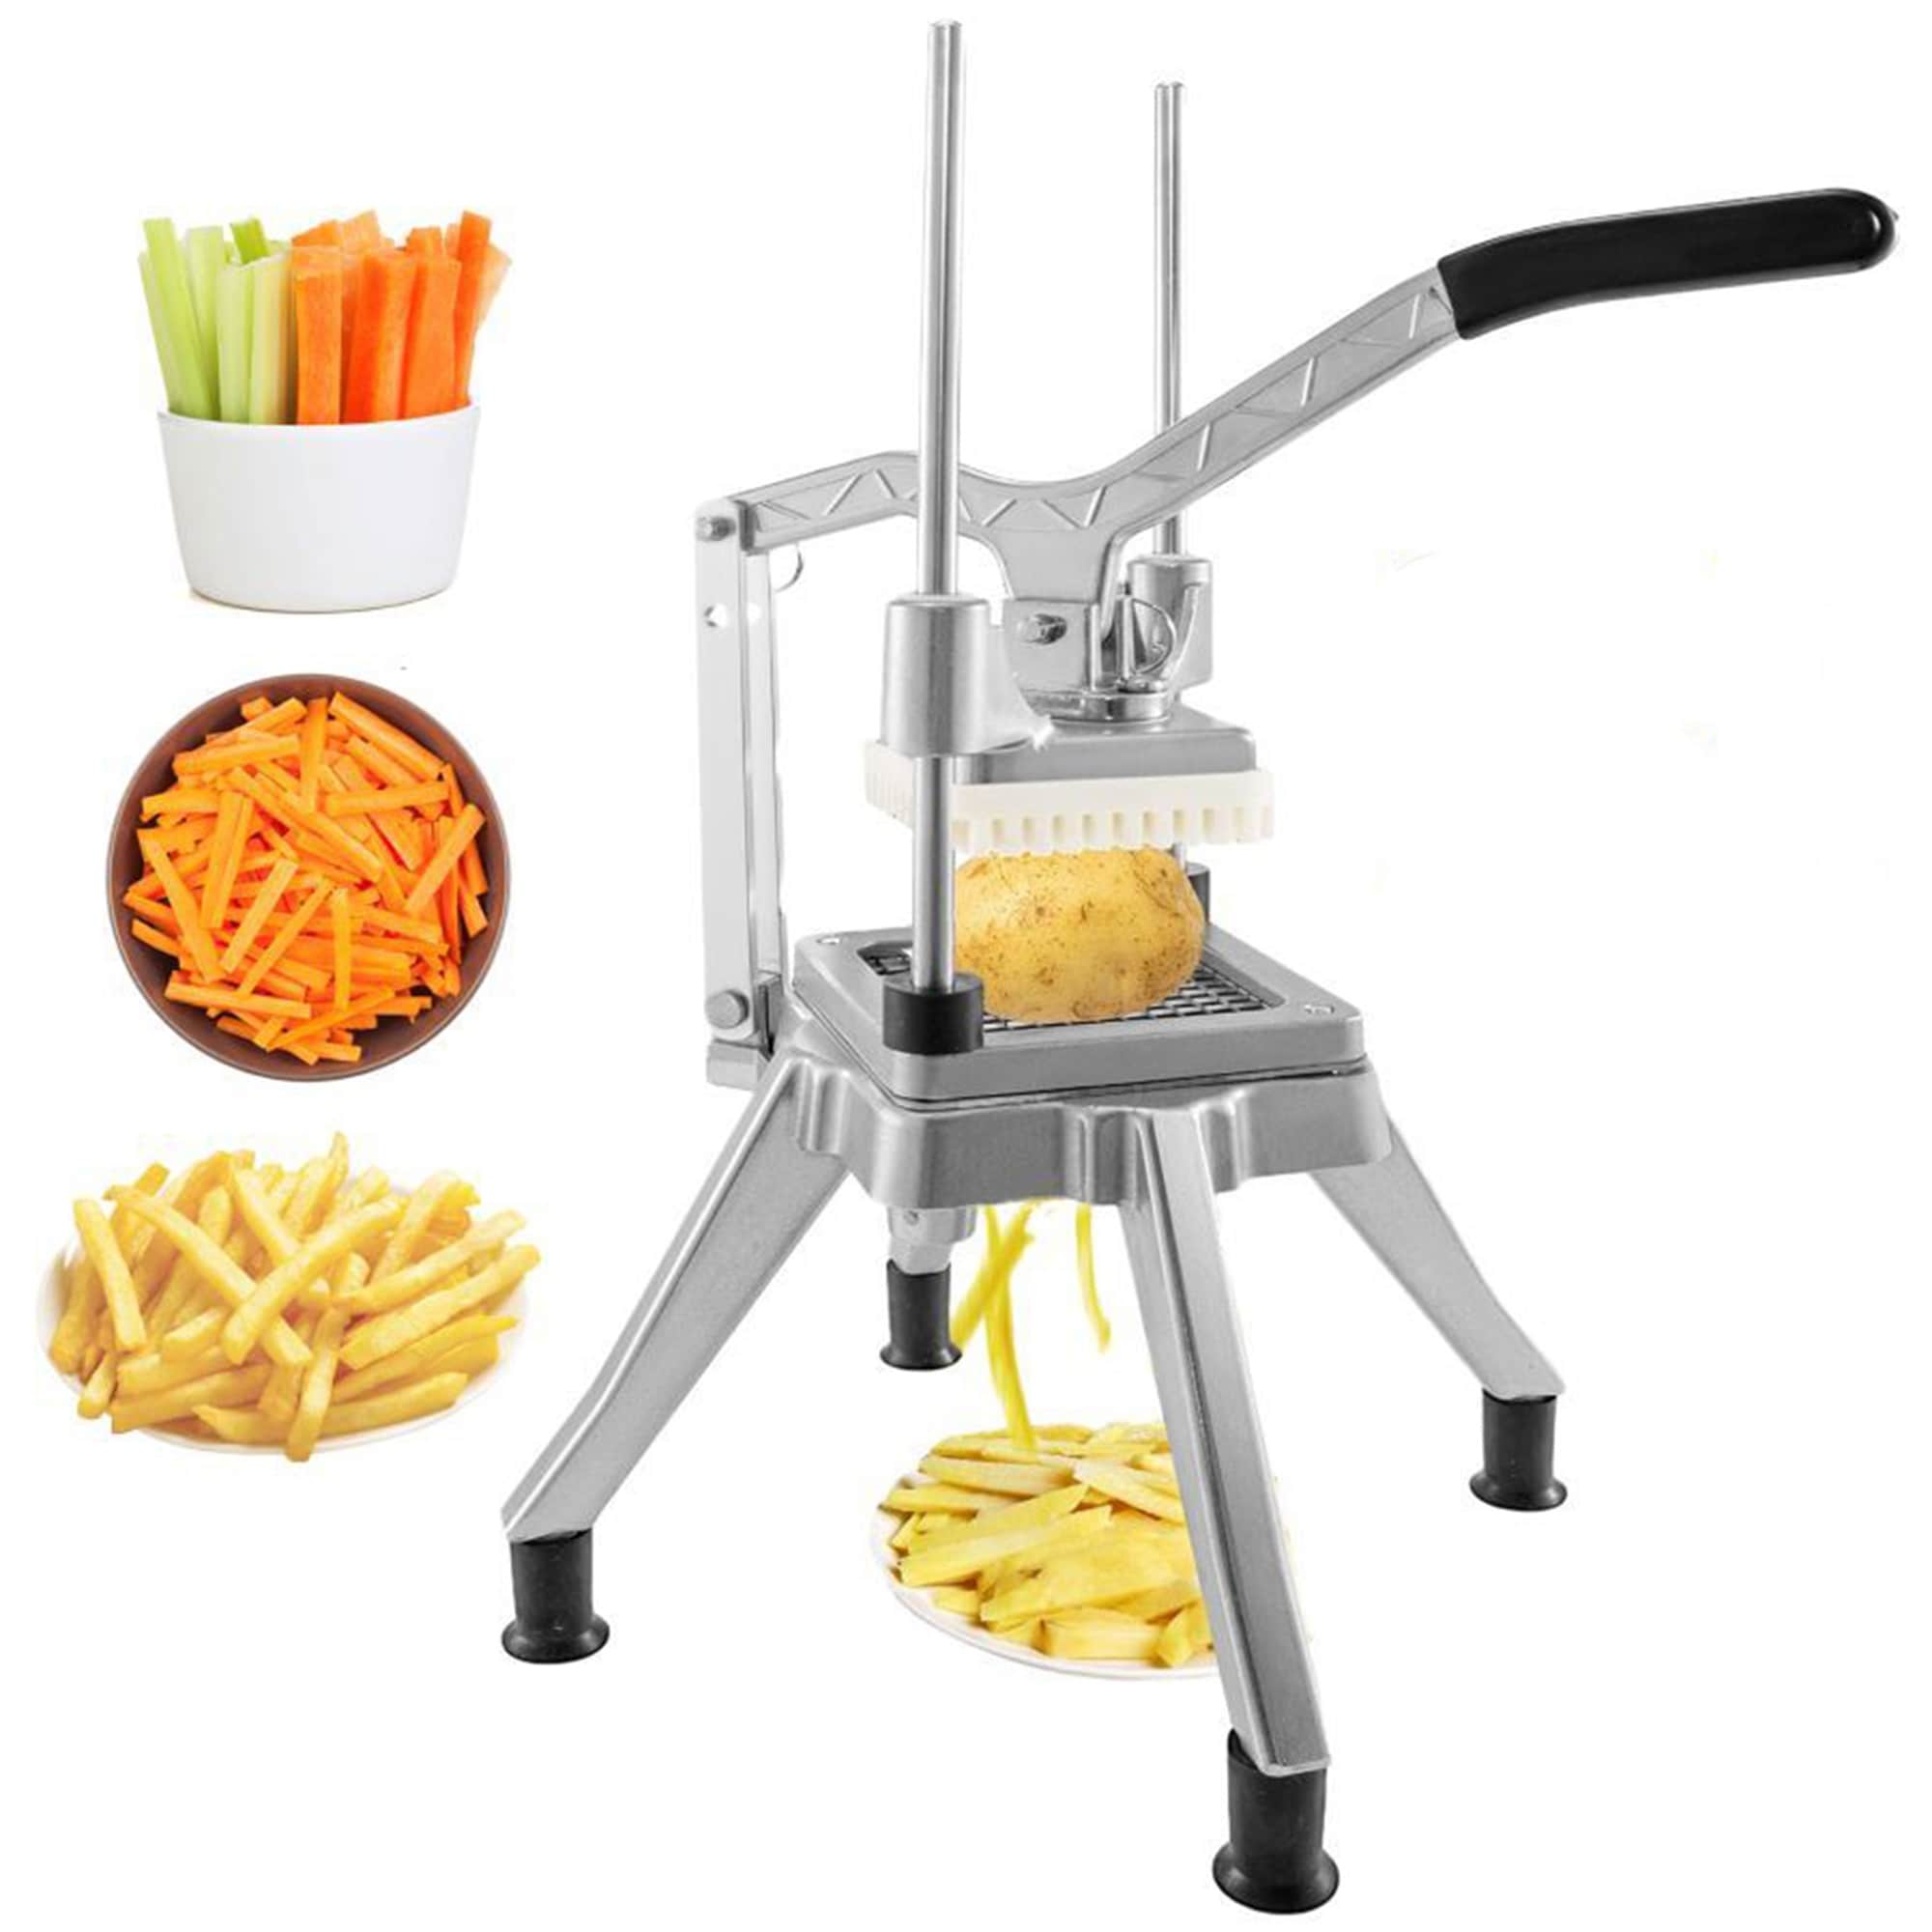 https://ak1.ostkcdn.com/images/products/is/images/direct/2aba7c5e410268d6a9e9387e1c191656edc2a9c8/9-mm-Commercial-Home-Vegetable-Fruit-Cutter.jpg